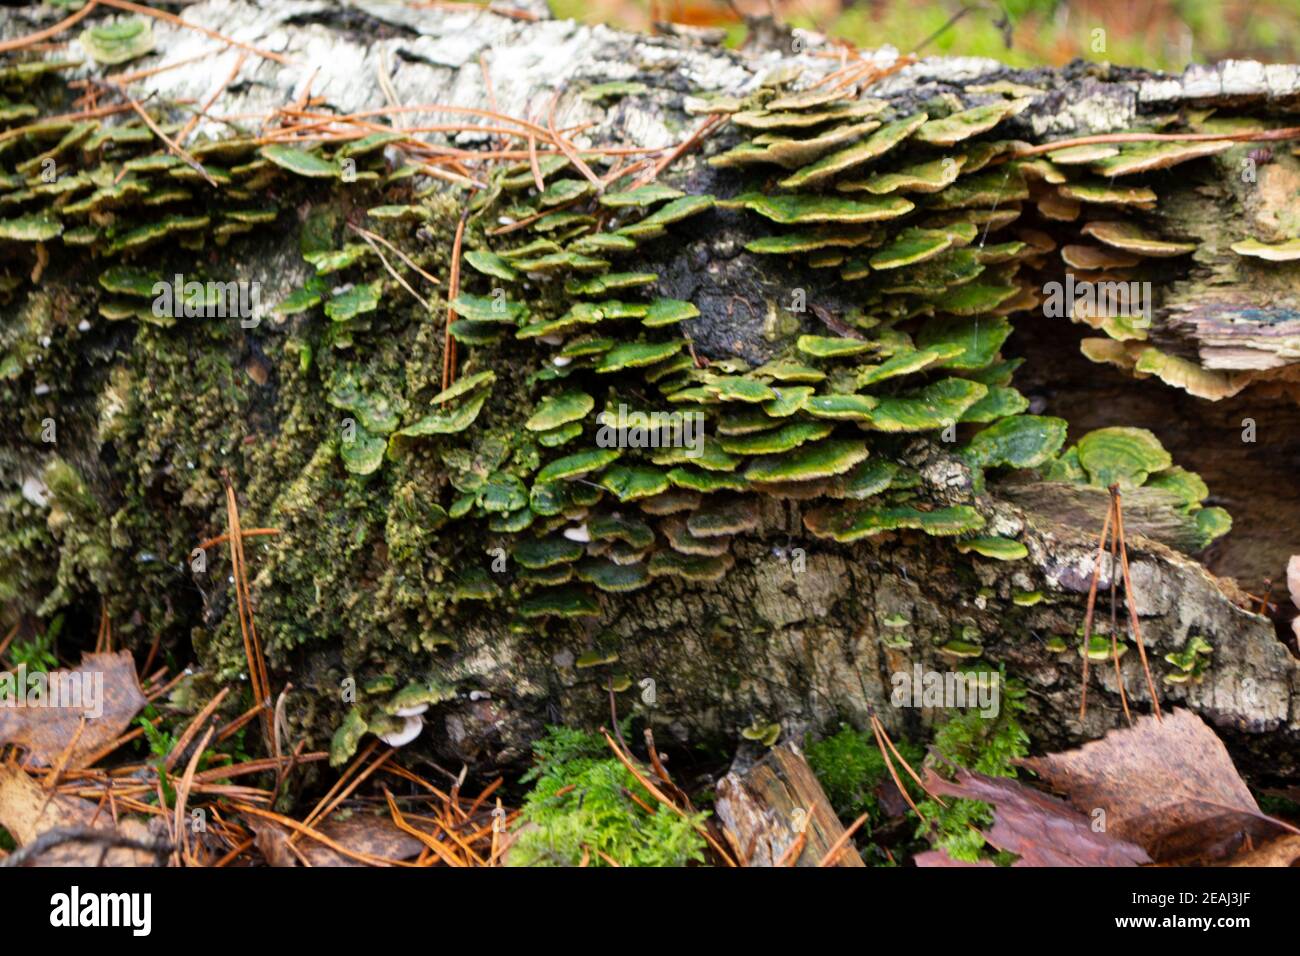 Lenzites betulina trametes betulina known as gilled polypore, birch mazegill or green gill polypore, fungus with medicinal properties from Belarus Stock Photo